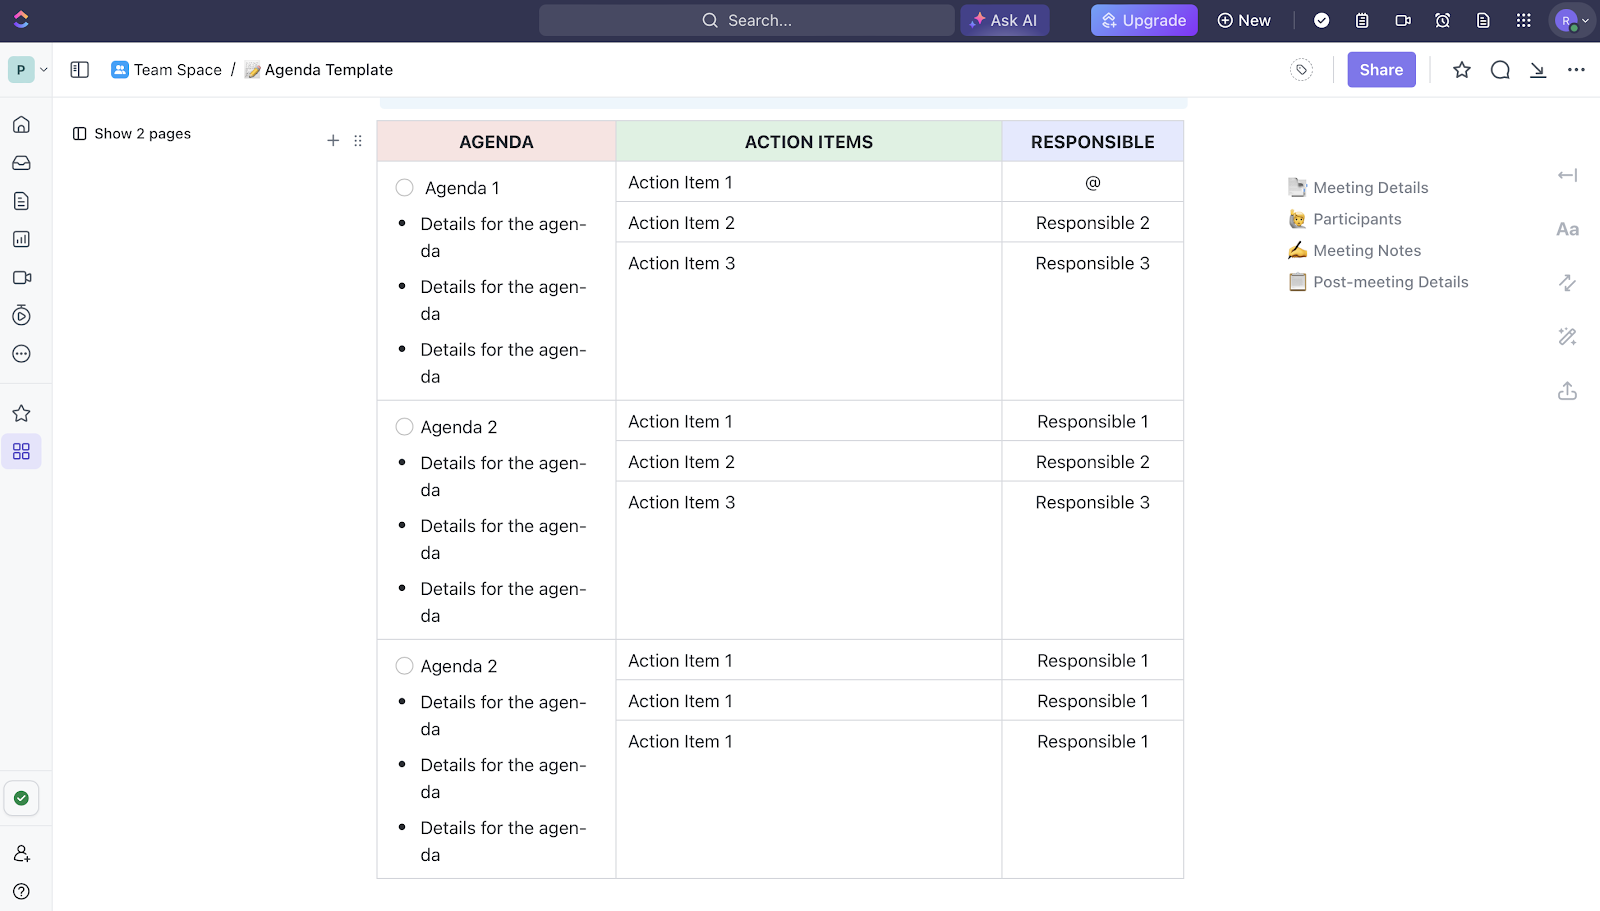 Utilize features like comment reactions, nested subtasks, and assigning multiple attendees to each agenda item in ClickUp’s Agenda Template